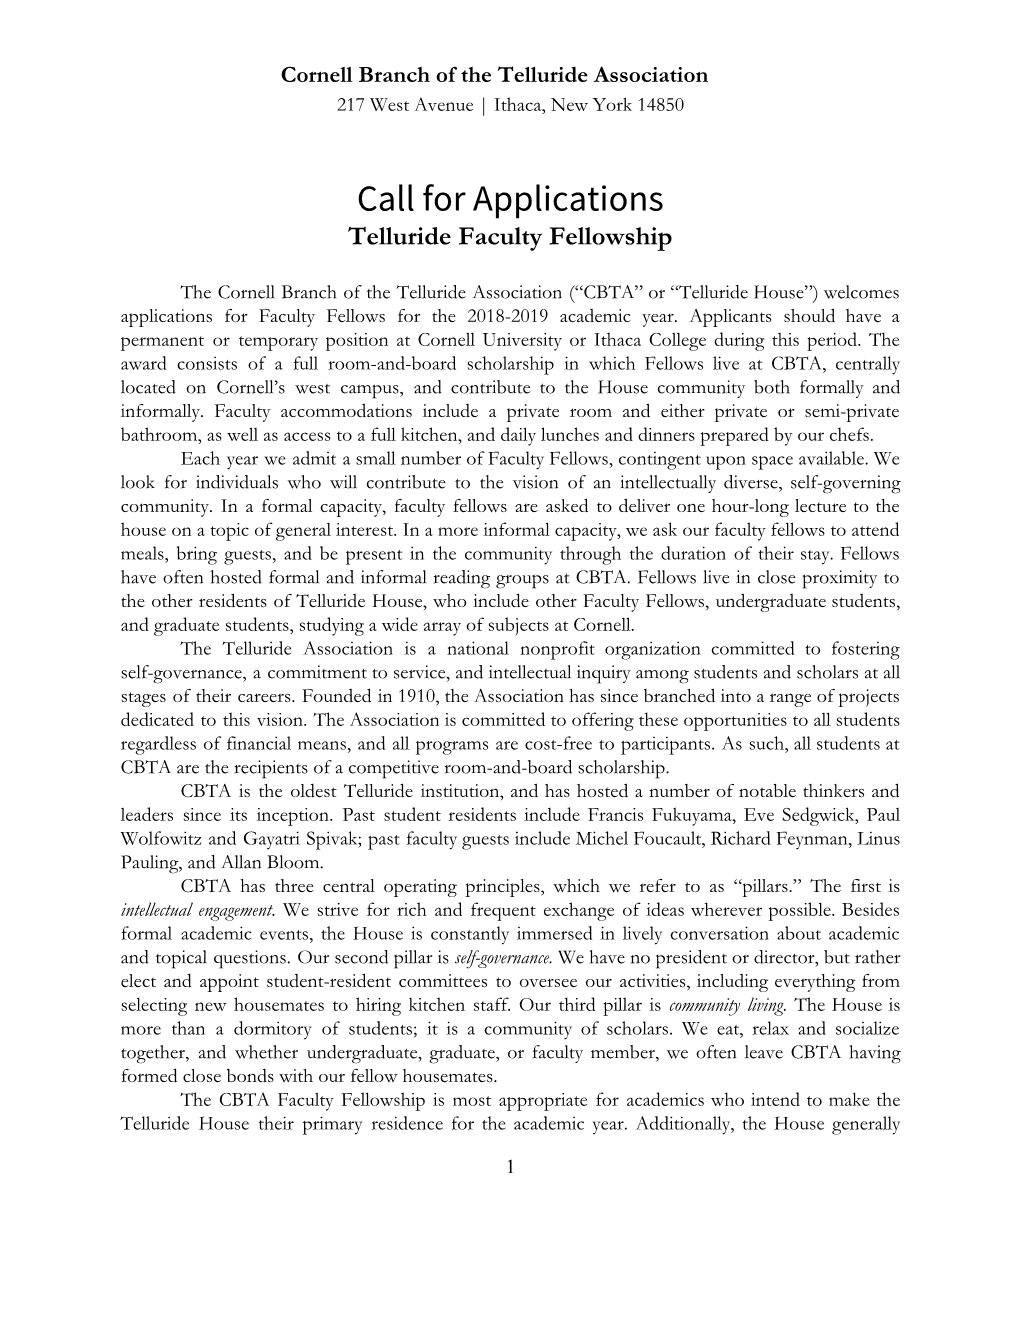 Call for Applications Telluride Faculty Fellowship